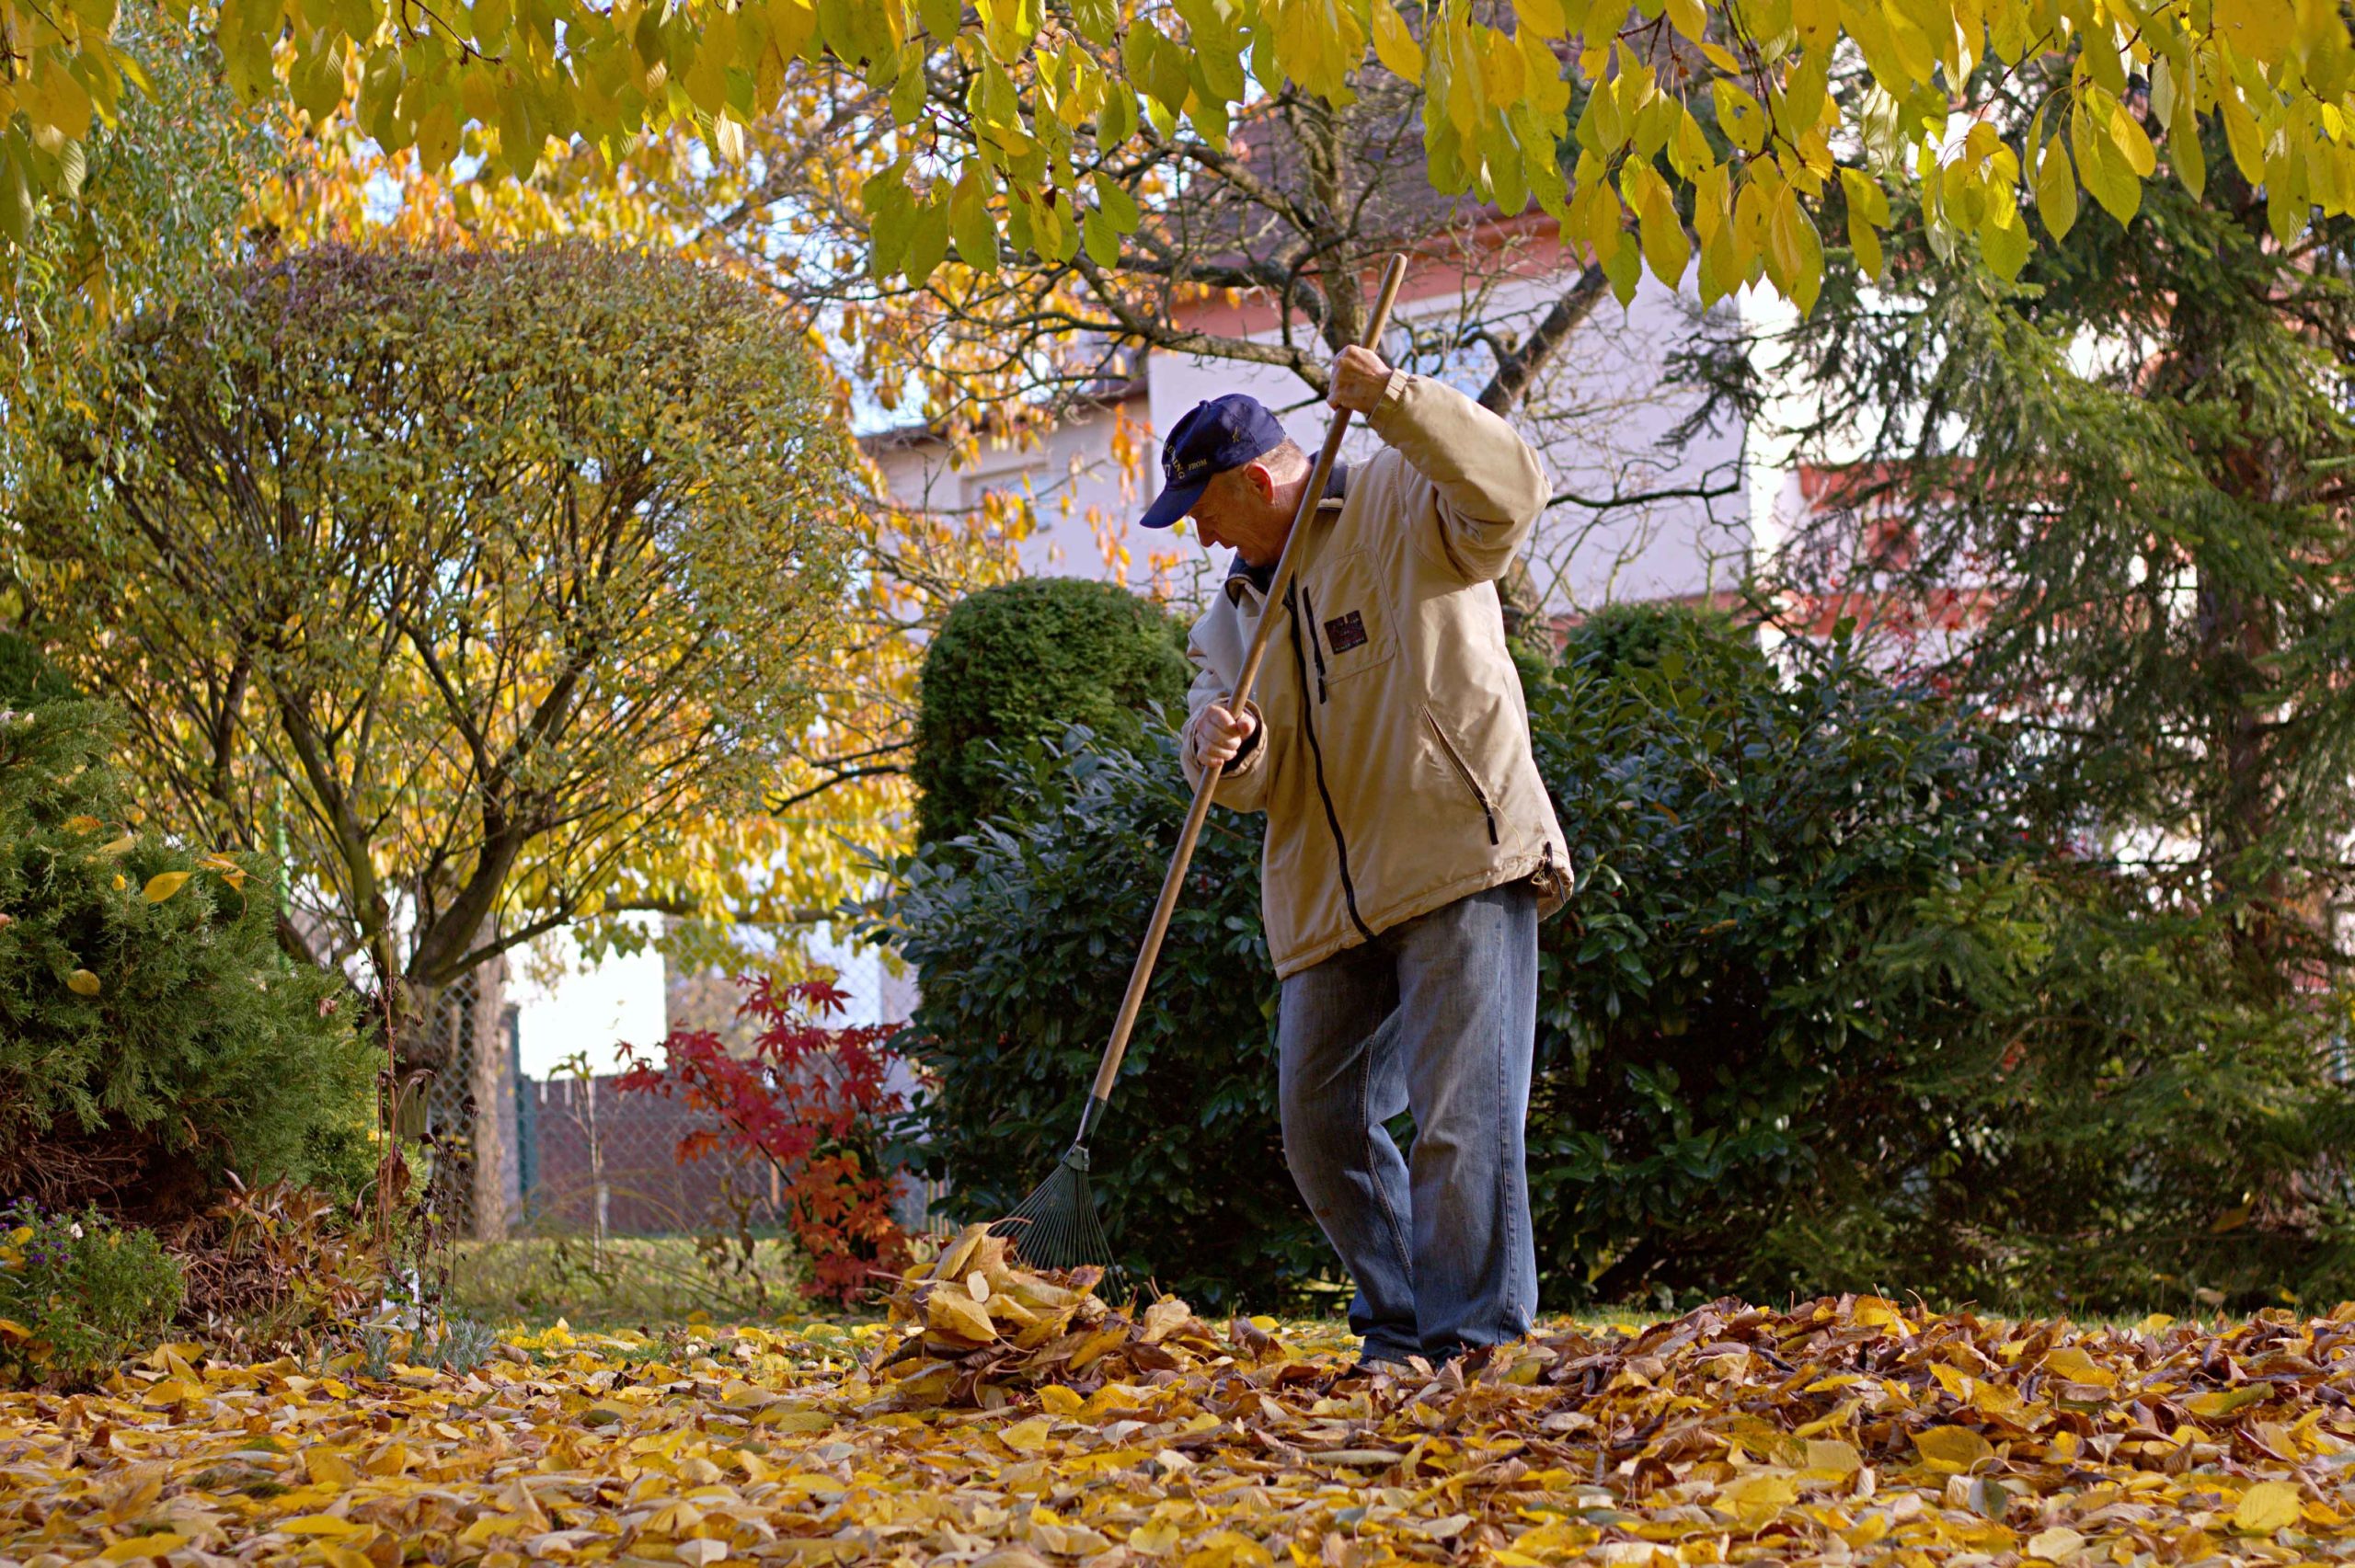 Tips to Stay Safe While Doing Autumn Yardwork